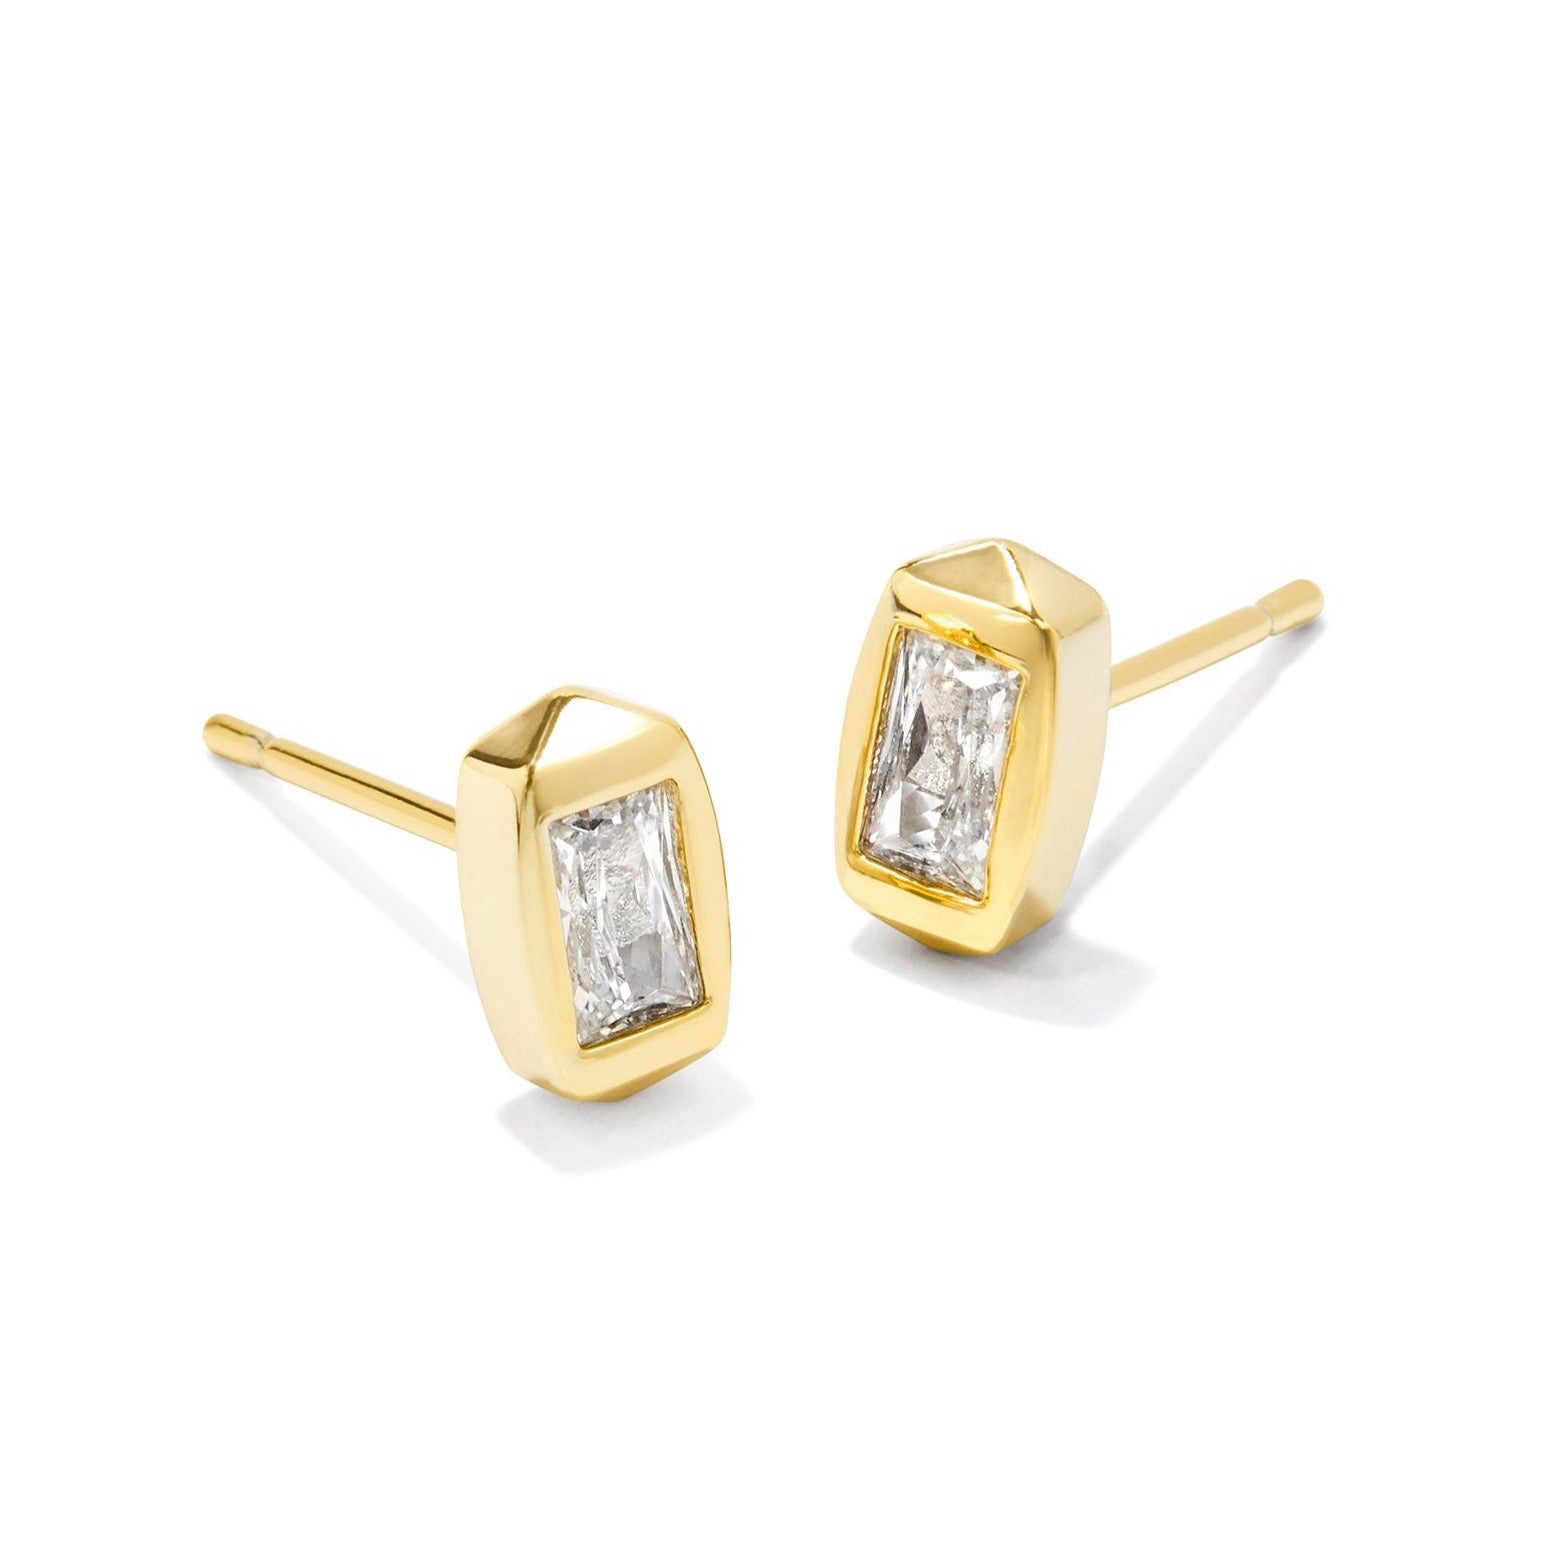 Kendra Scott | Fern Gold Crystal Stud Earrings in White Crystal - Giddy Up Glamour Boutique